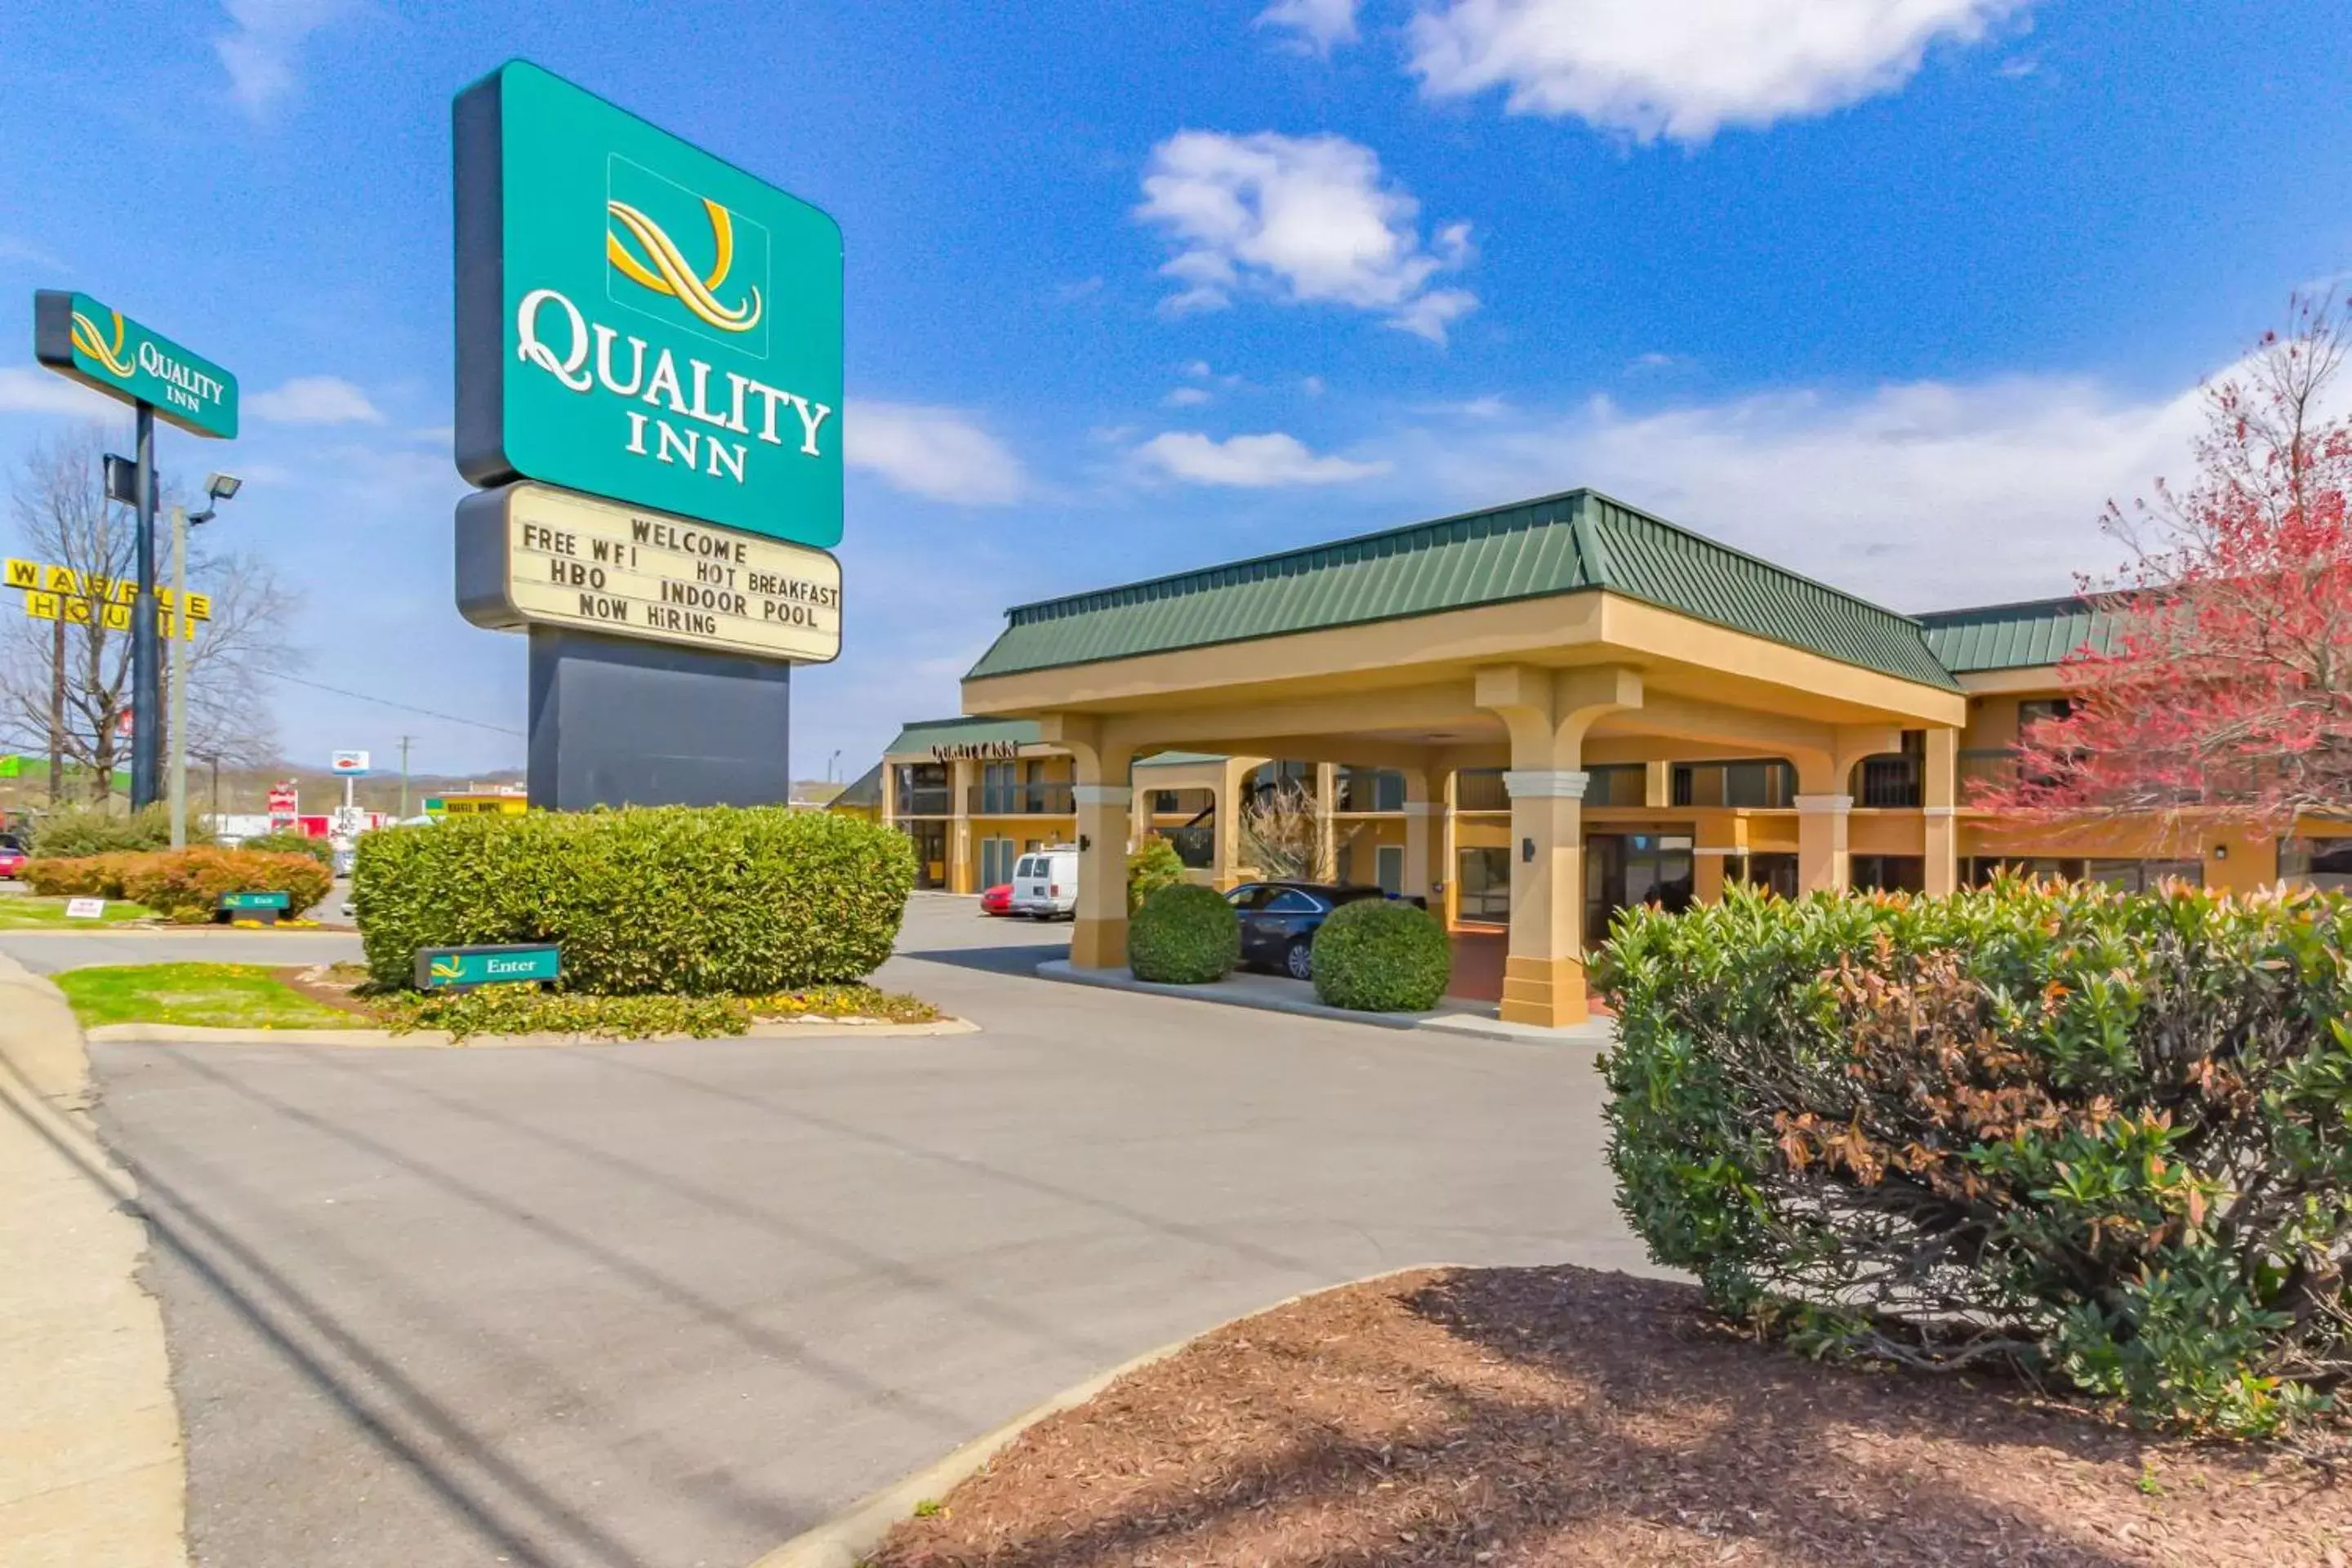 Property Building in Quality Inn Goodlettsville